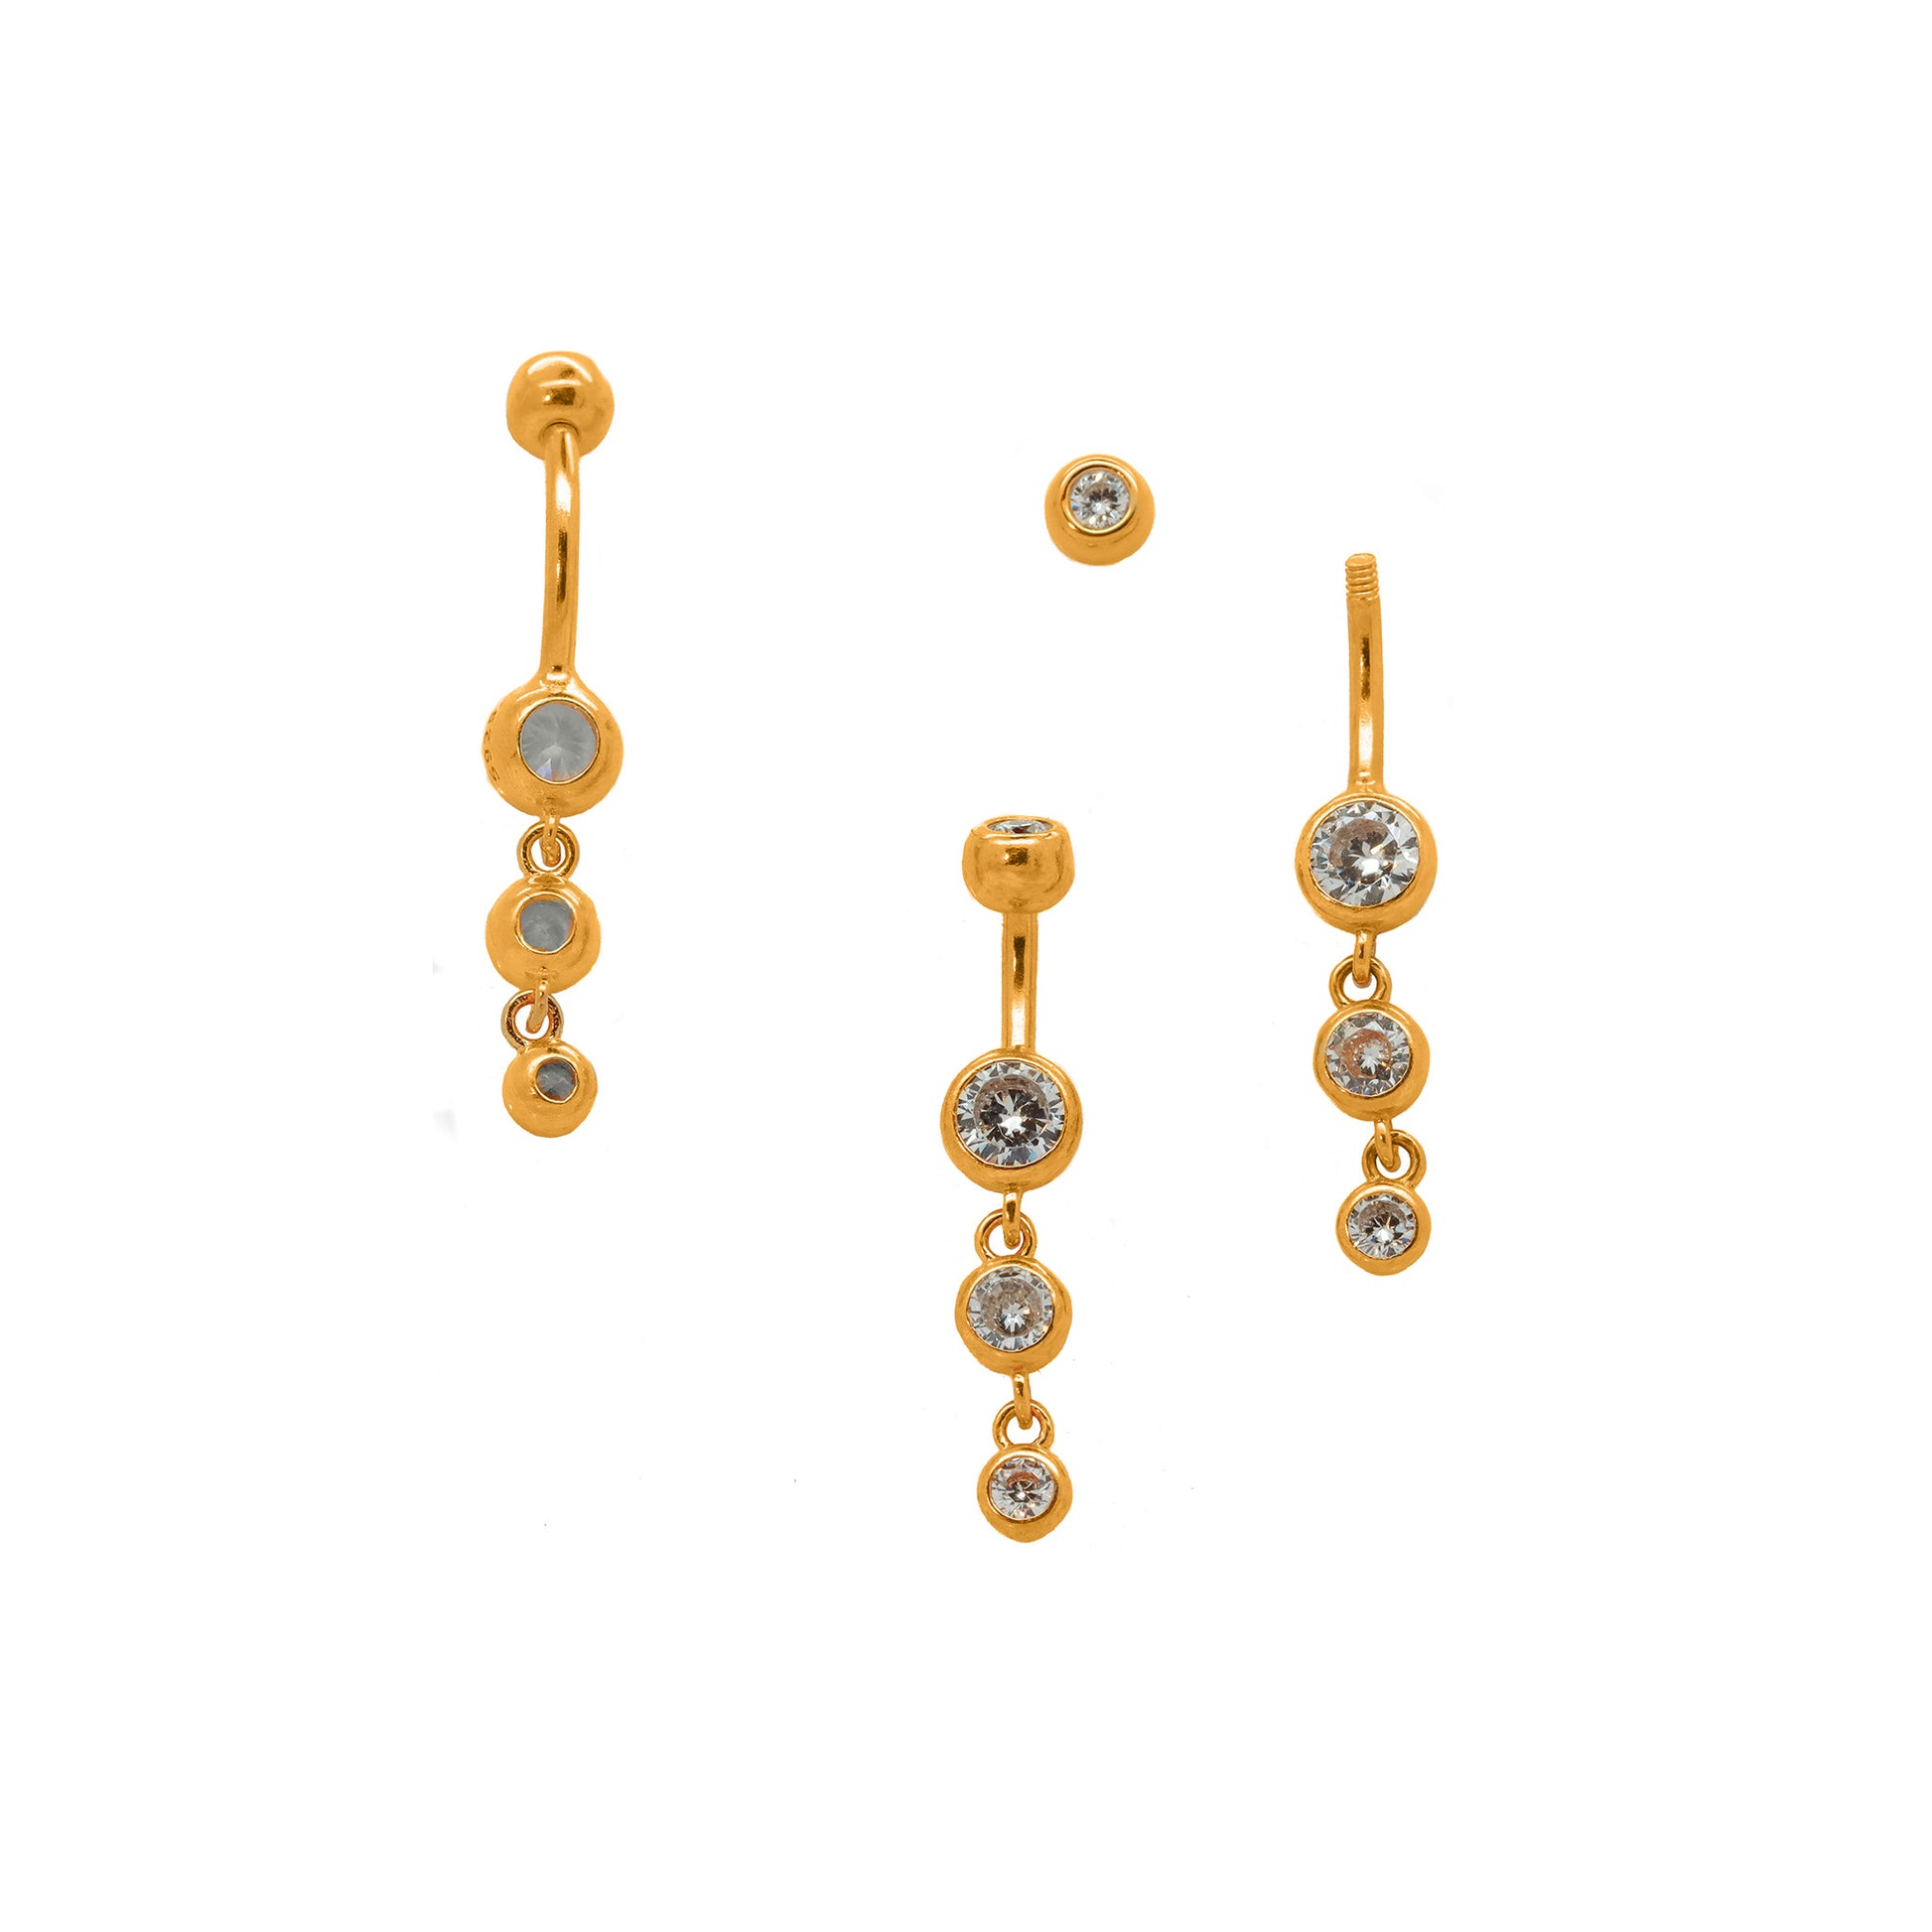 Vermeil | 925 Silver 24k Gold Coated Triple Charm Dangle Belly Ring | 14G 6mm 1/4" 8mm 5/16" 10mm 3/8" - Sturdy South